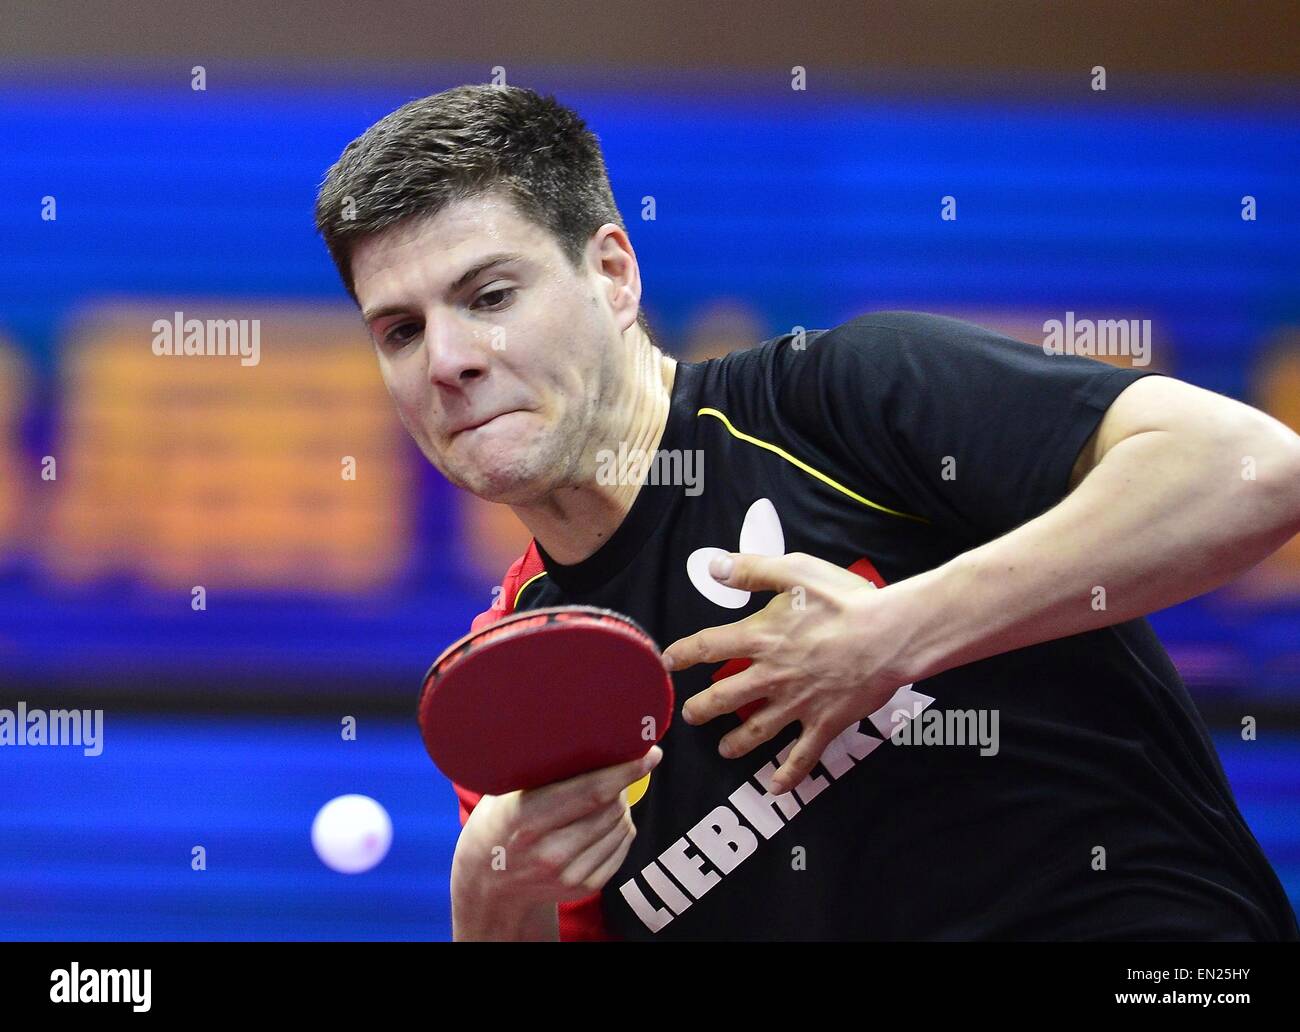 German table tennis player Dimitrij Ovtcharov plays against table tennis  robot "Forpheus" at the world's biggest industrial fair, "Hannover Fair",  in Hanover, Germany, April 22, 2018. REUTERS/Fabian Bimmer Stock Photo -  Alamy